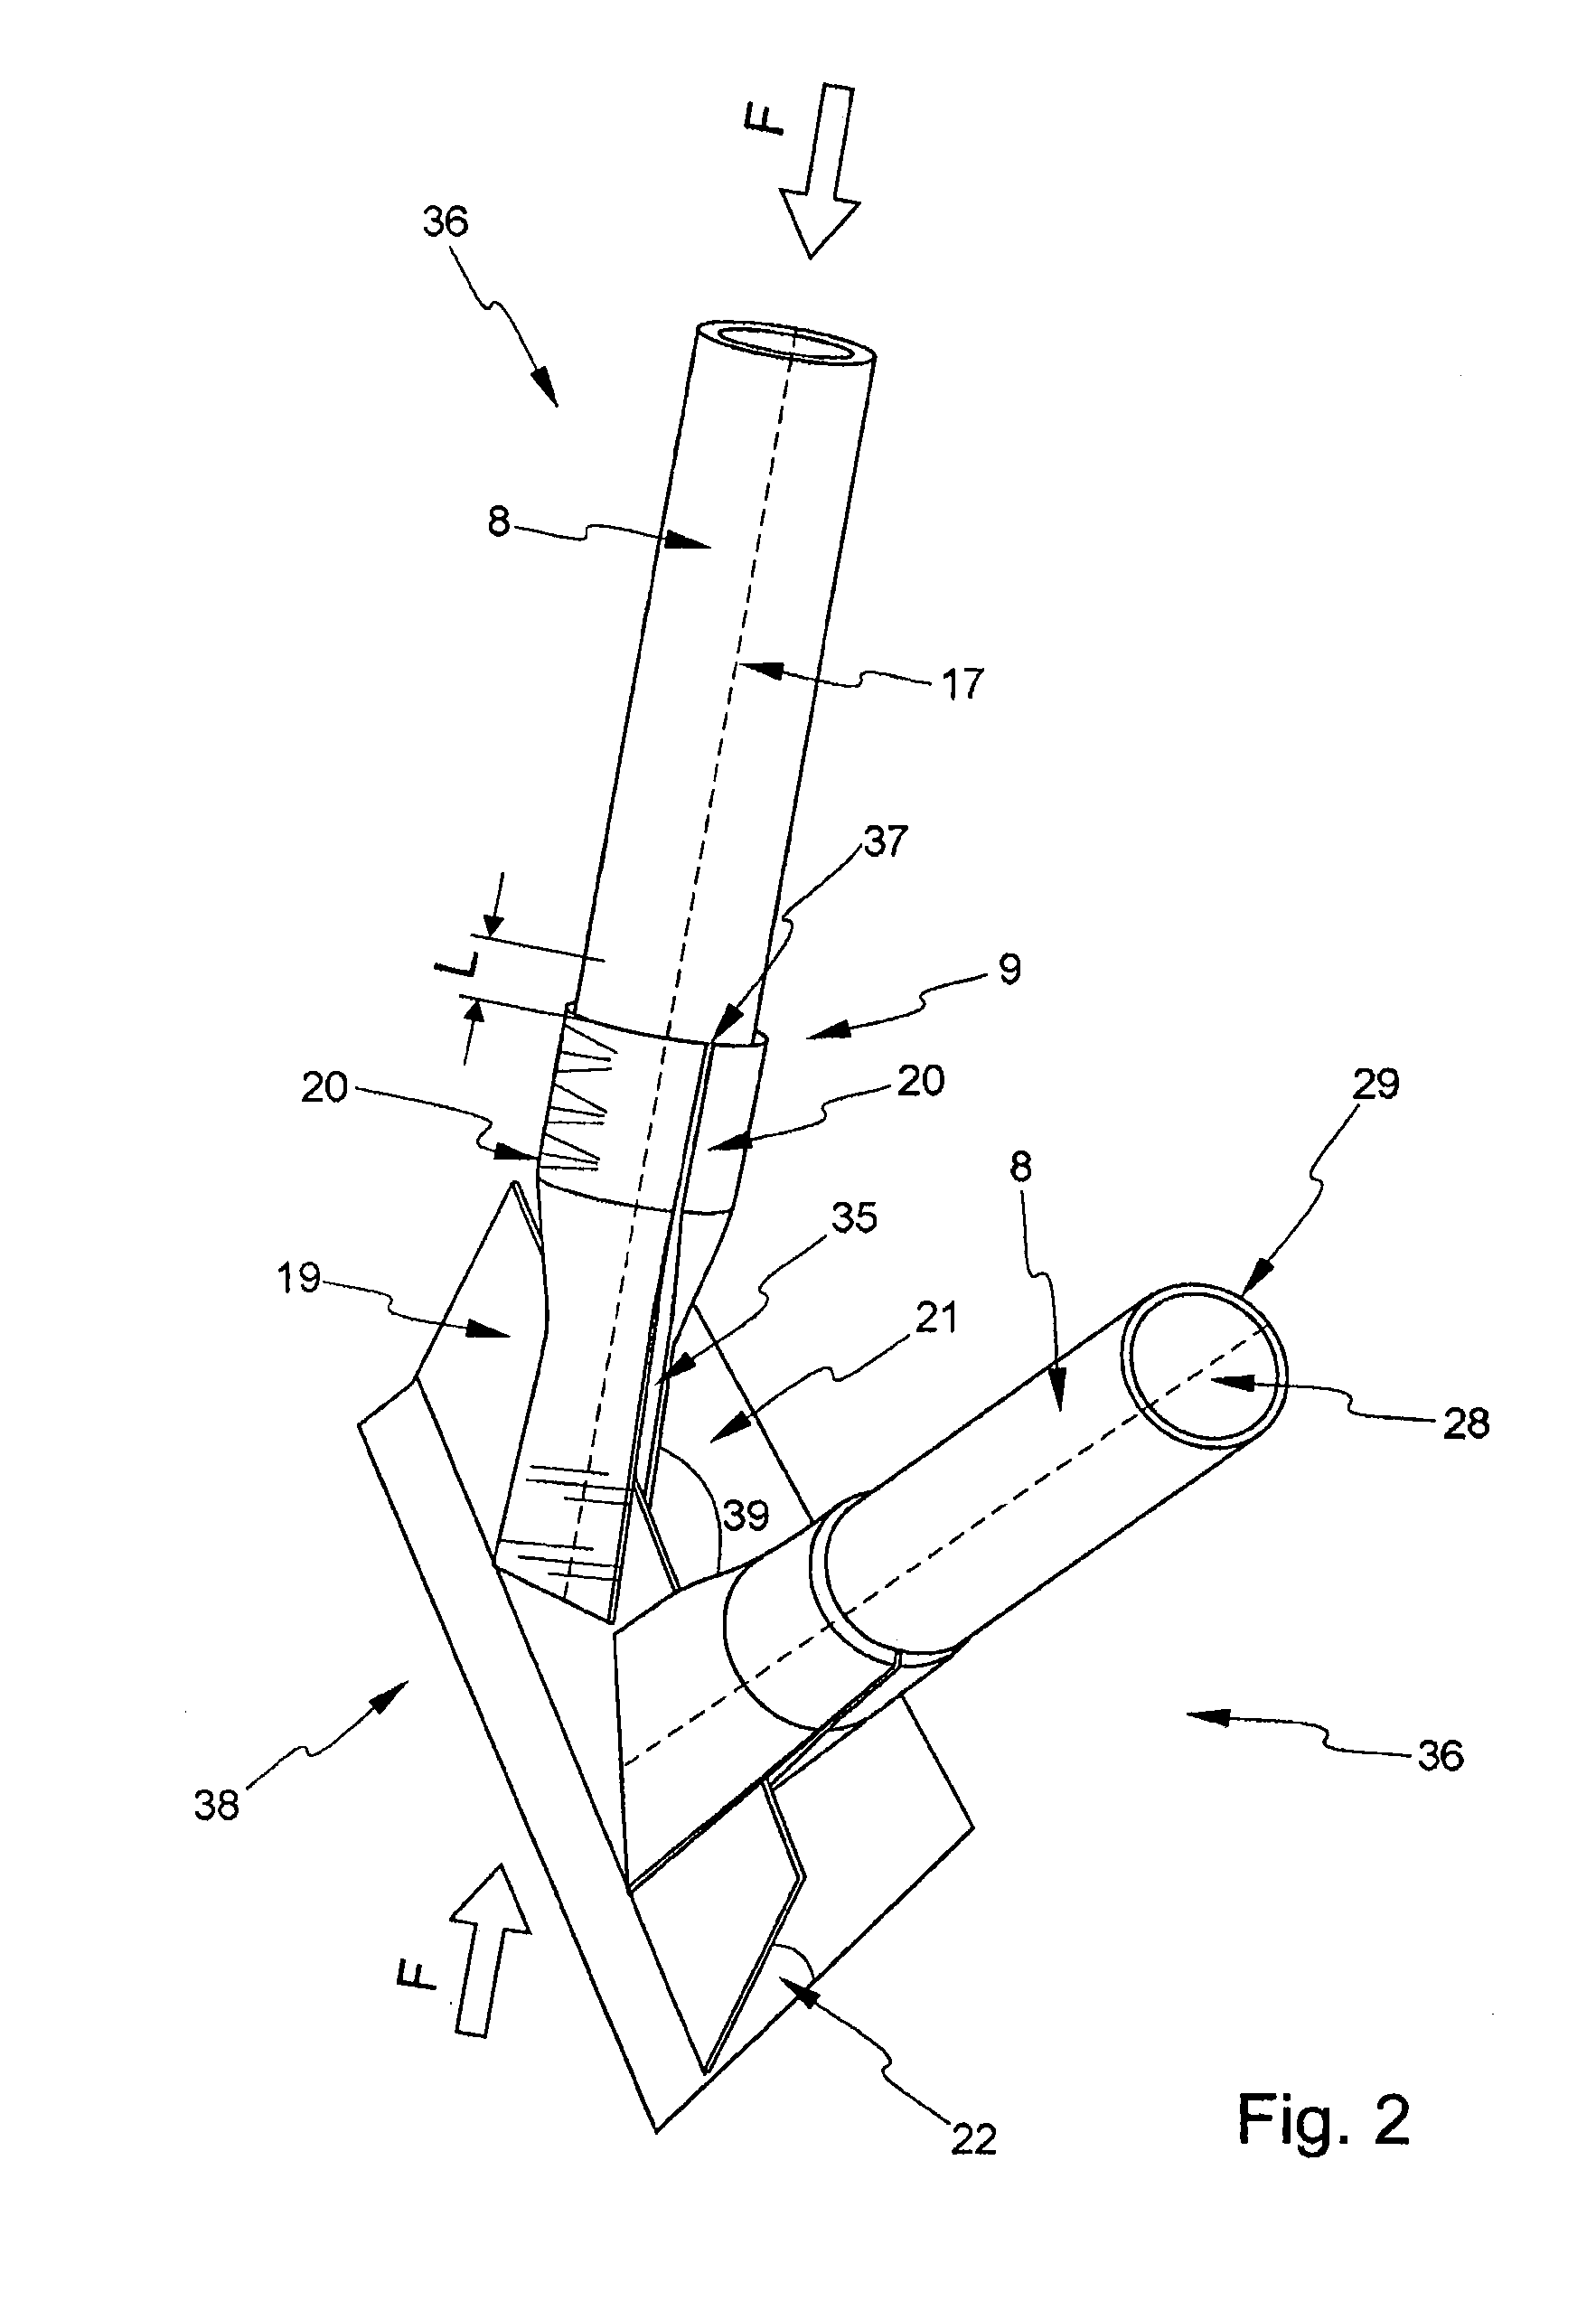 Support structure for a wing